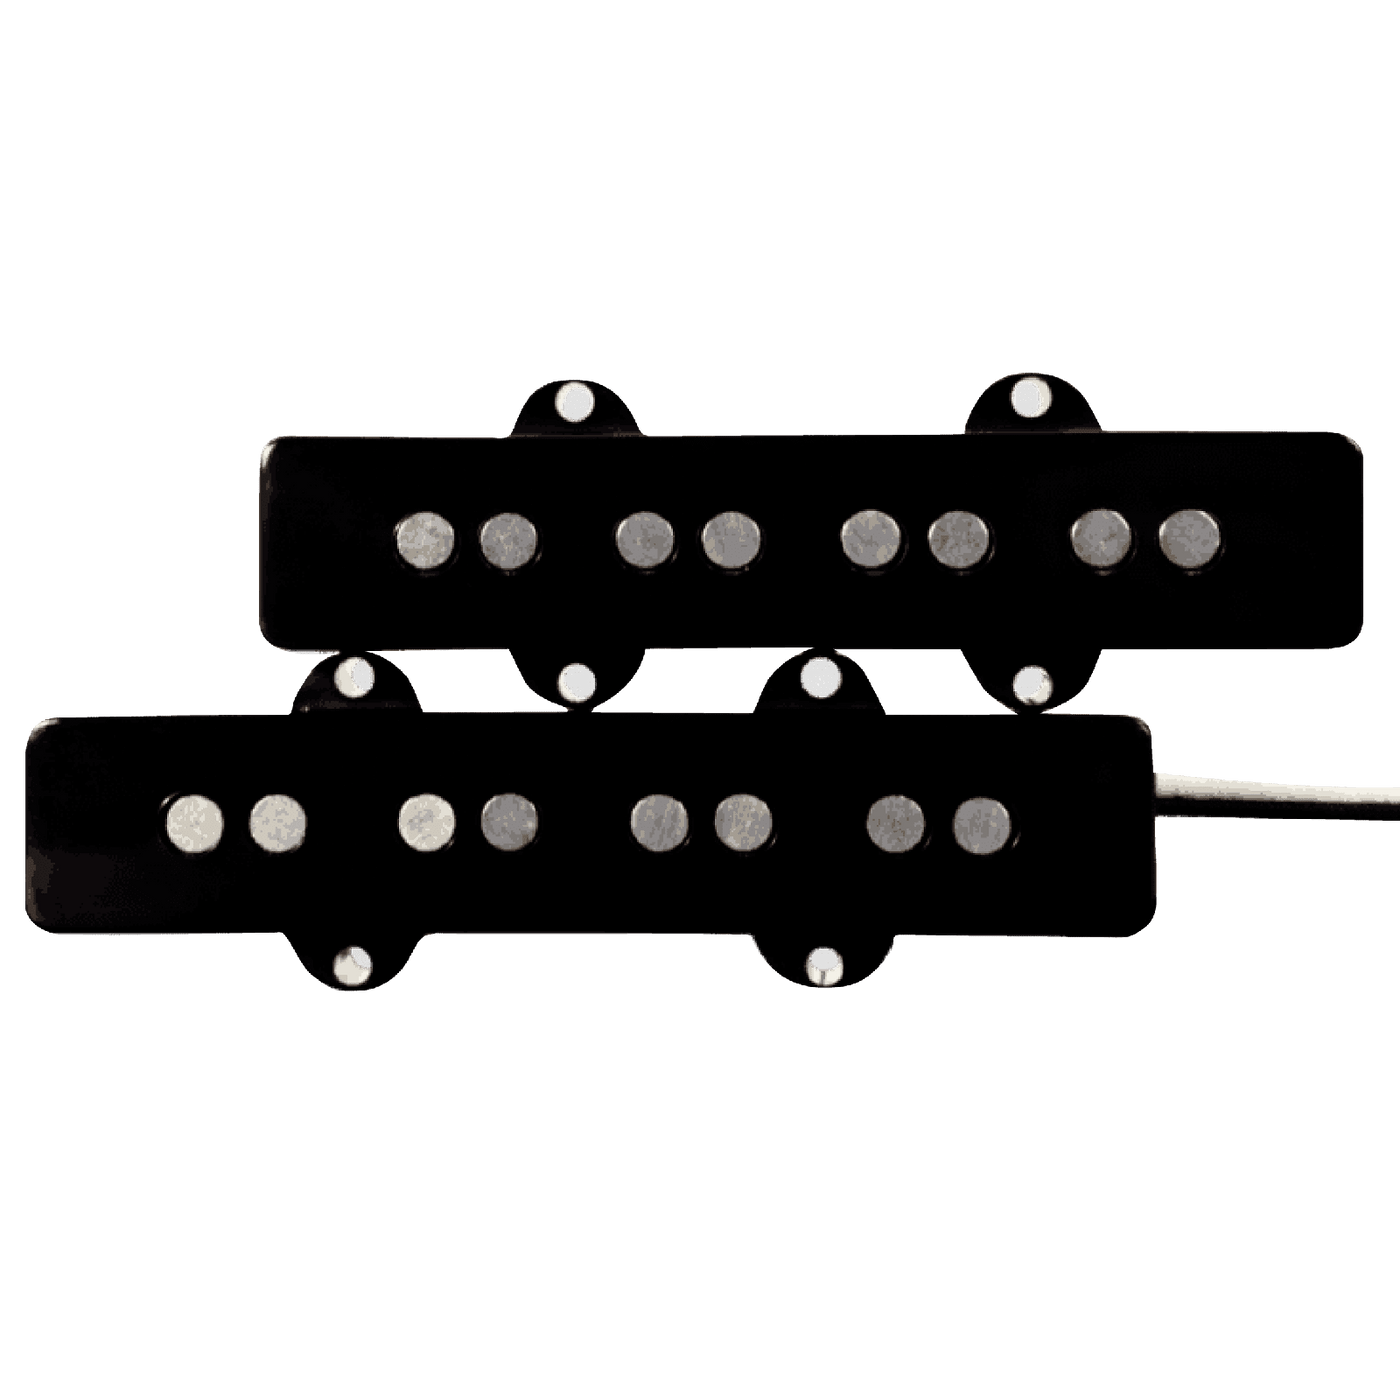 Lindy Fralin Jazz Bass 4 Black Cover - DescriptionFralin Jazz Bass Pickups are fat, loud, punchy, and clear. They have articulation and definition not found in other manufacturers’ pickups. We use all USA-Made parts, and wind and build them one at a time